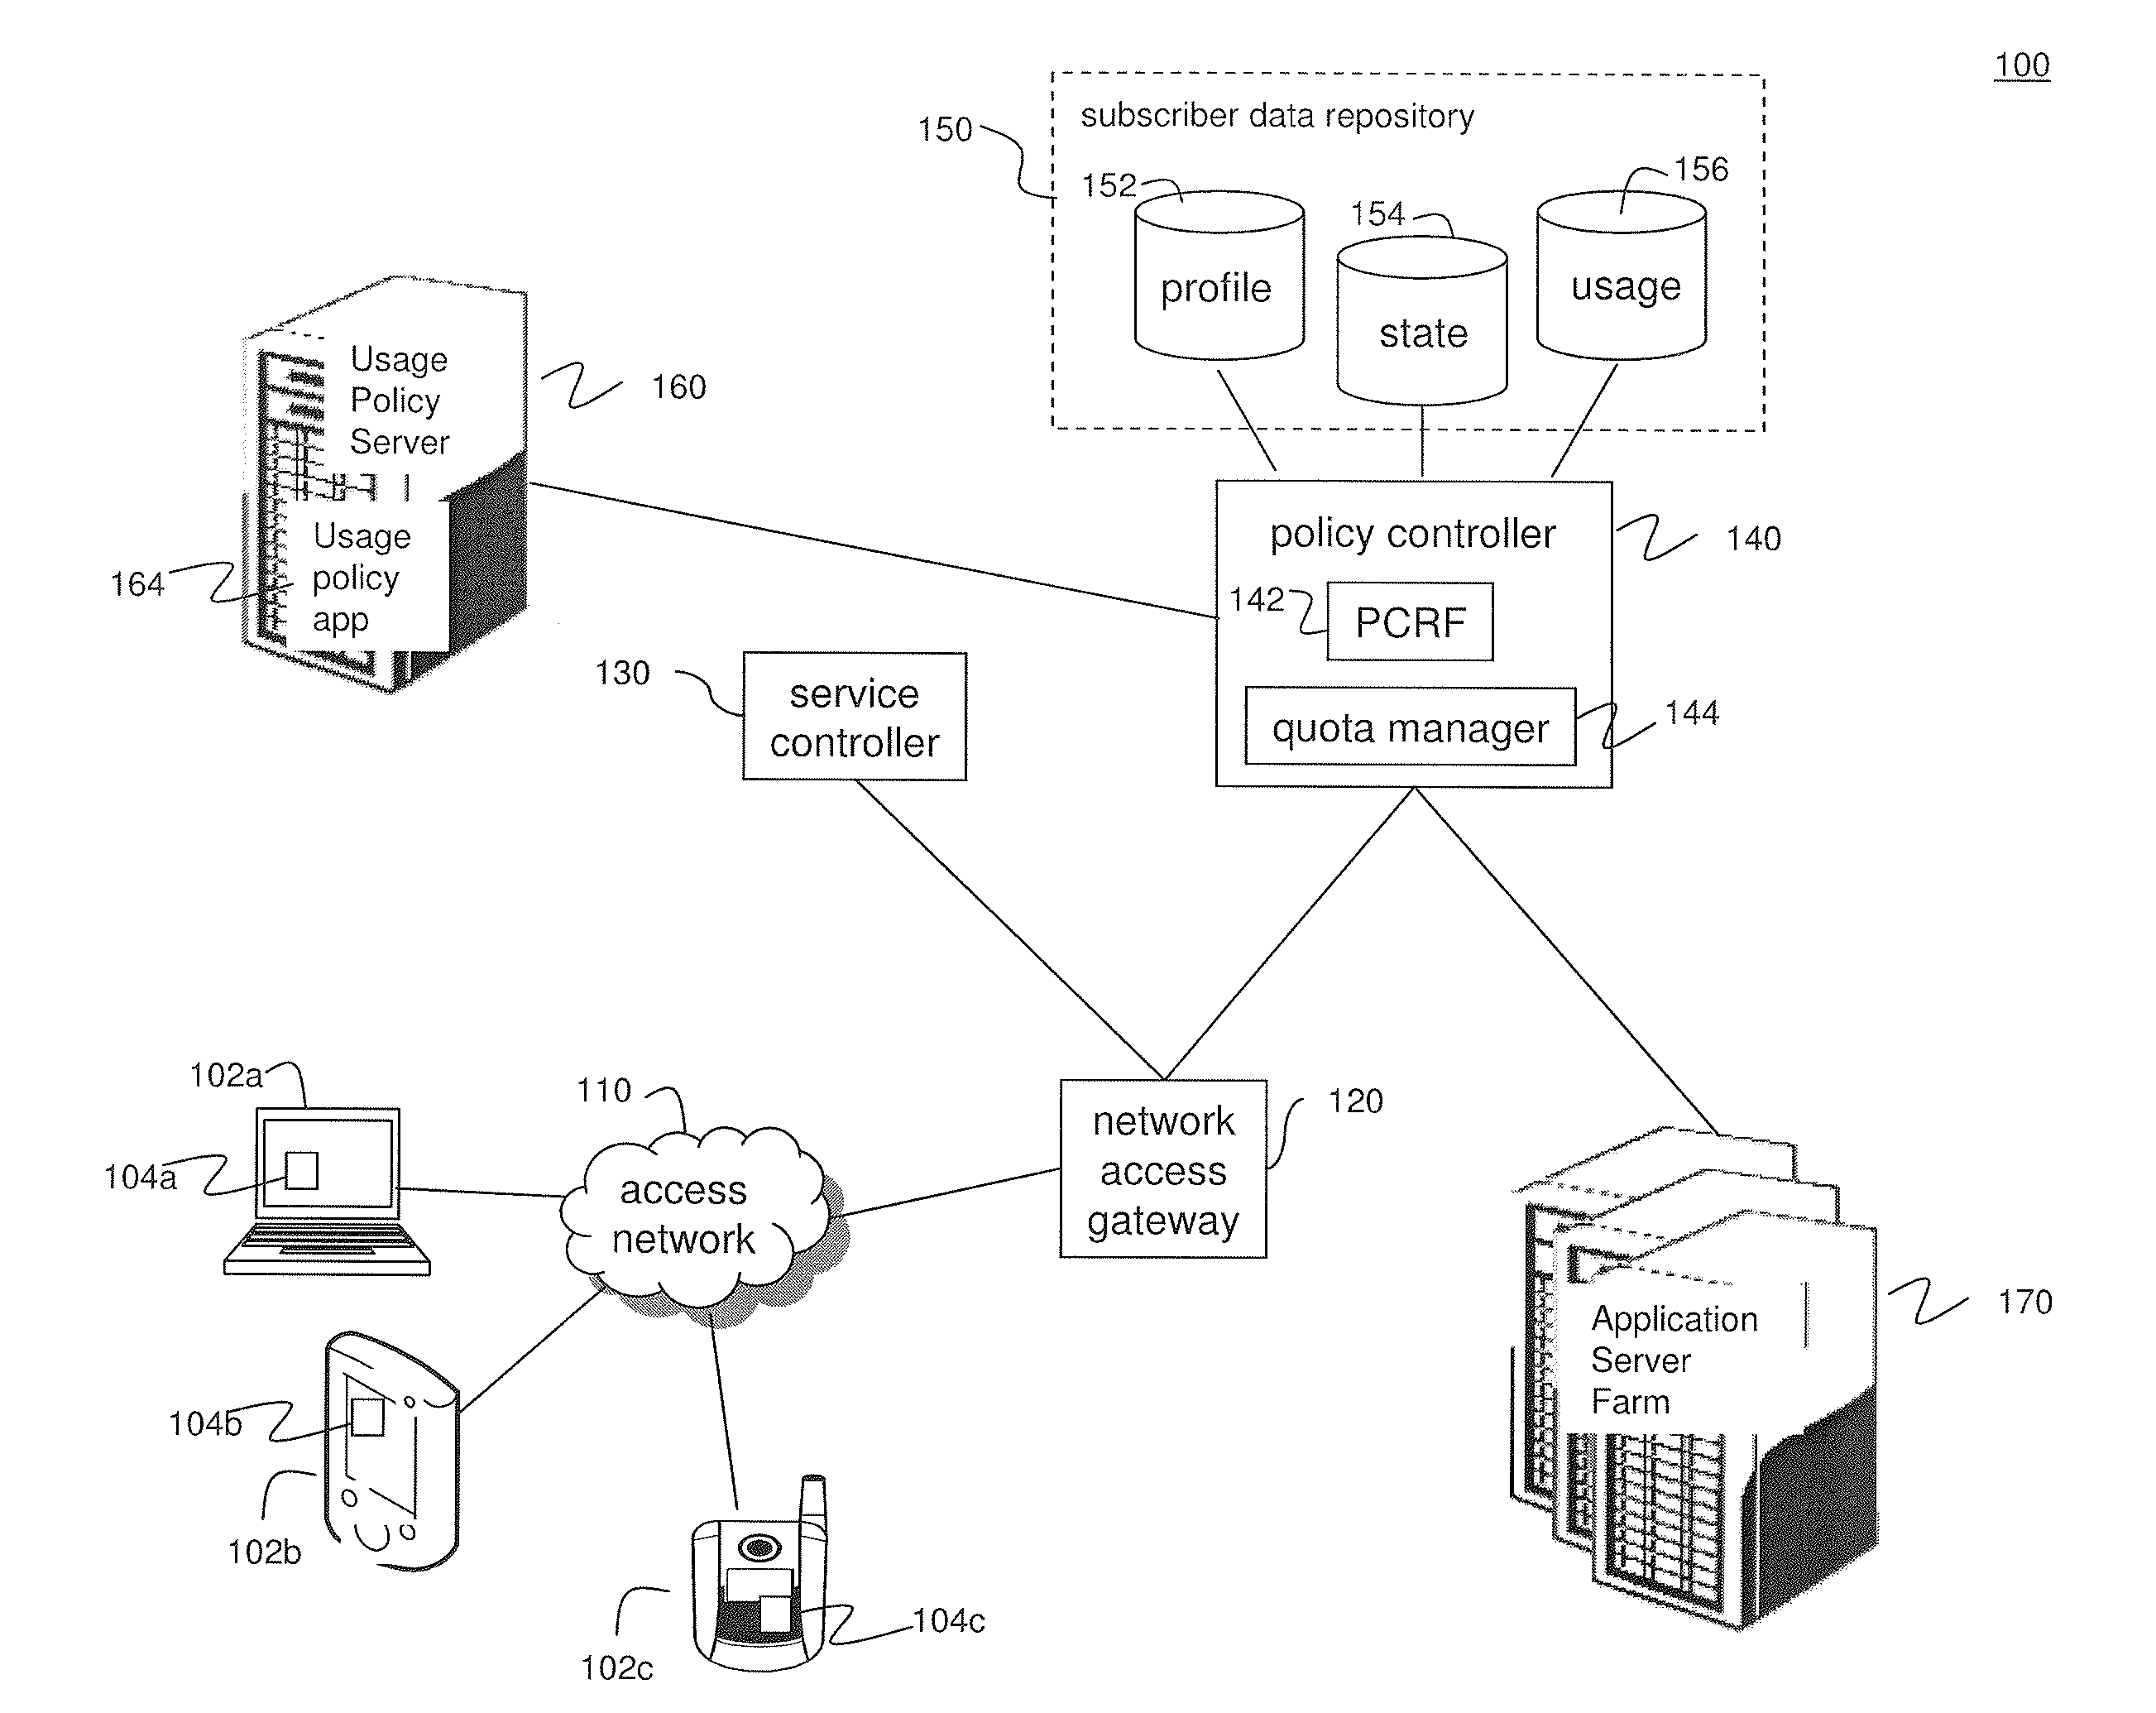 System and Methods for Carrier-Centric Mobile Device Data Communications Cost Monitoring and Control